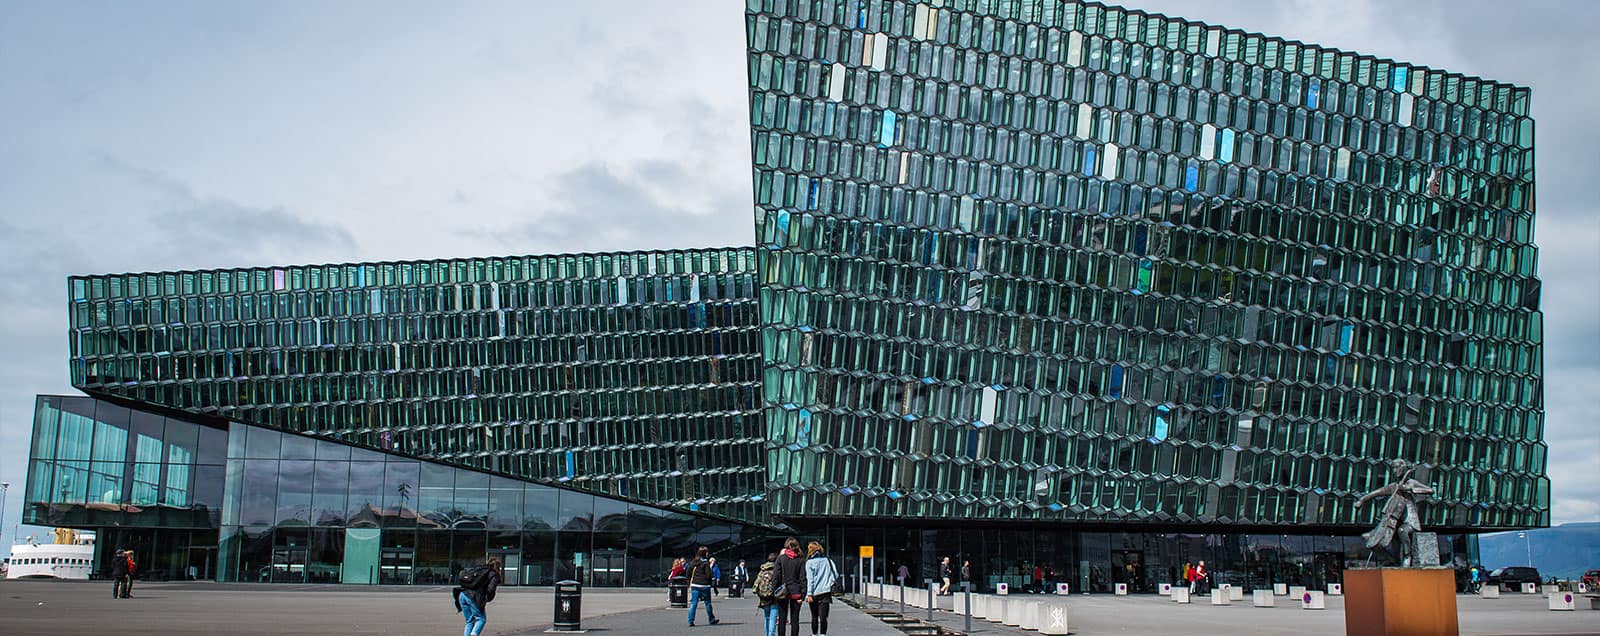 14six8-Blog-Image-7-Beautiful-Acoustically-Designed-Buildings-Harpa-Concert-Hall-and-Conference-Centre